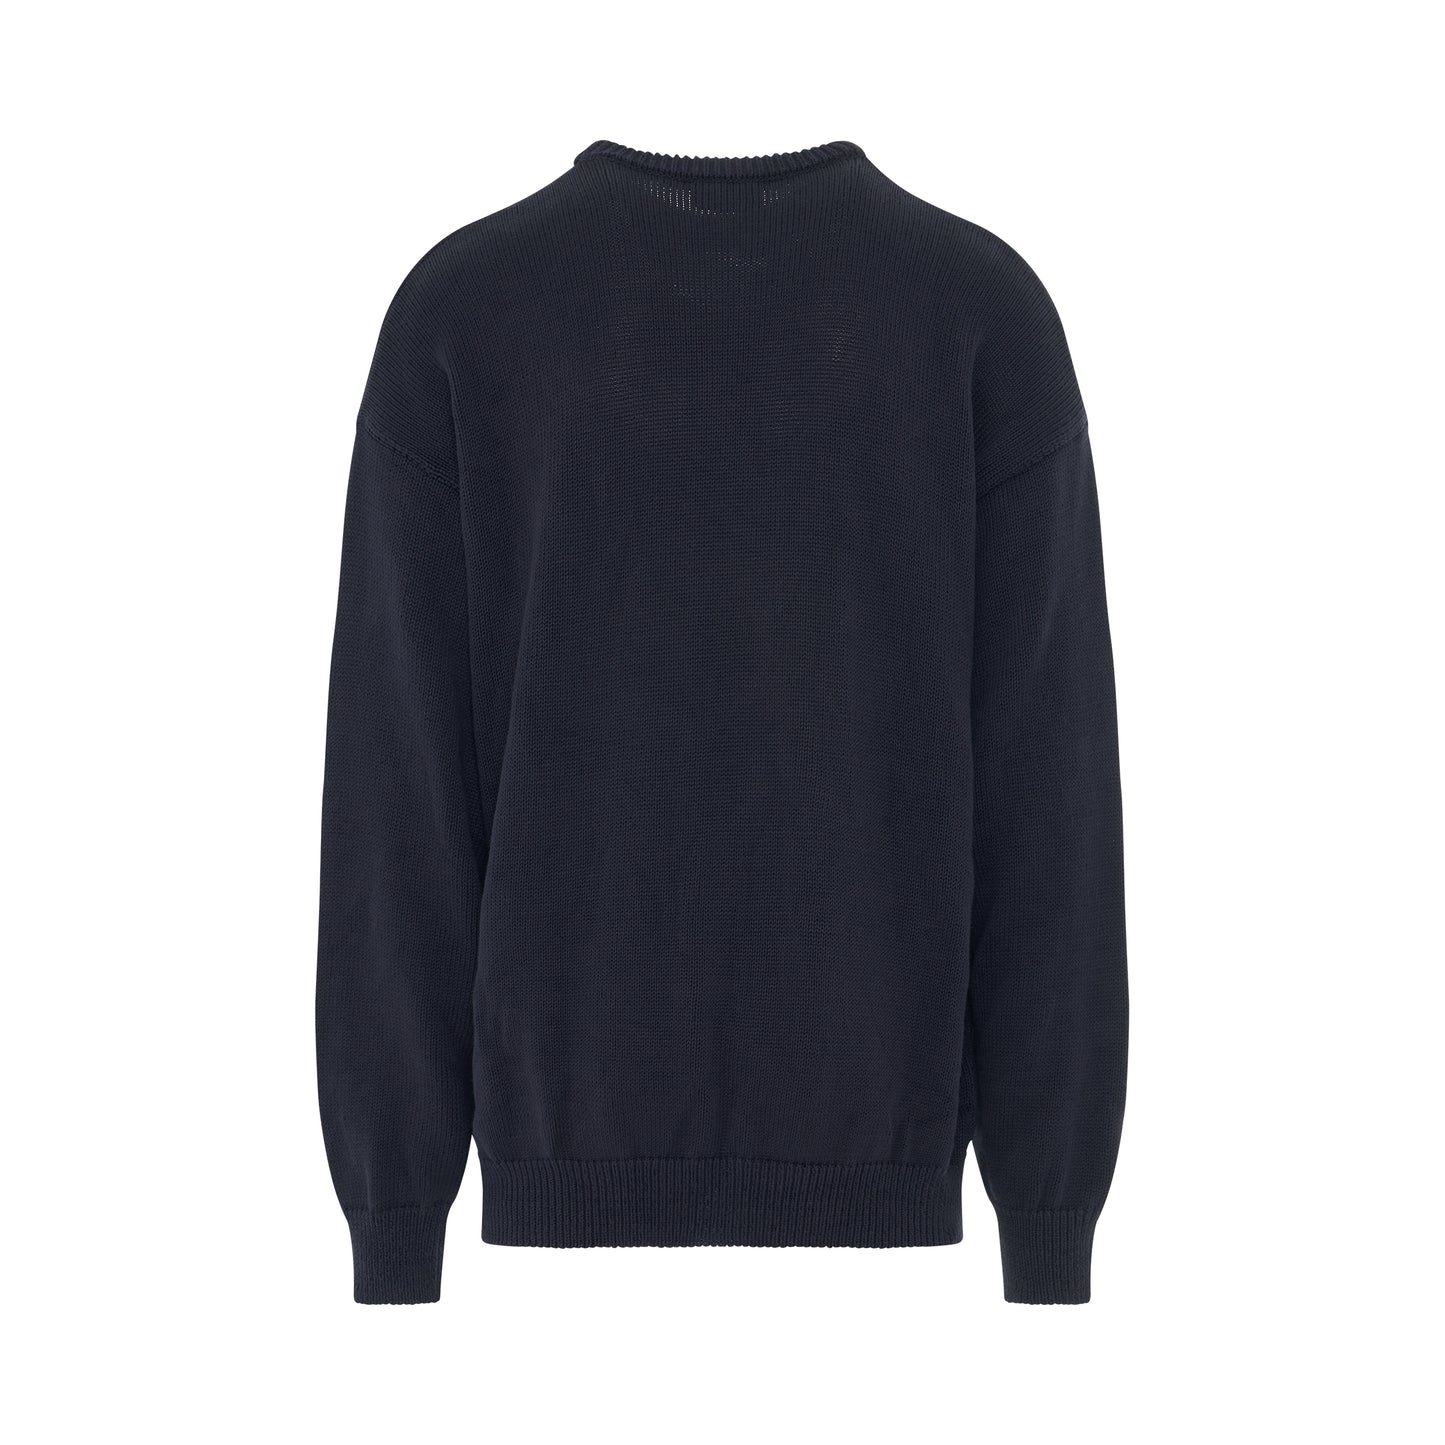 College Crest Knit Long Sleeve Crewneck in Navy/White